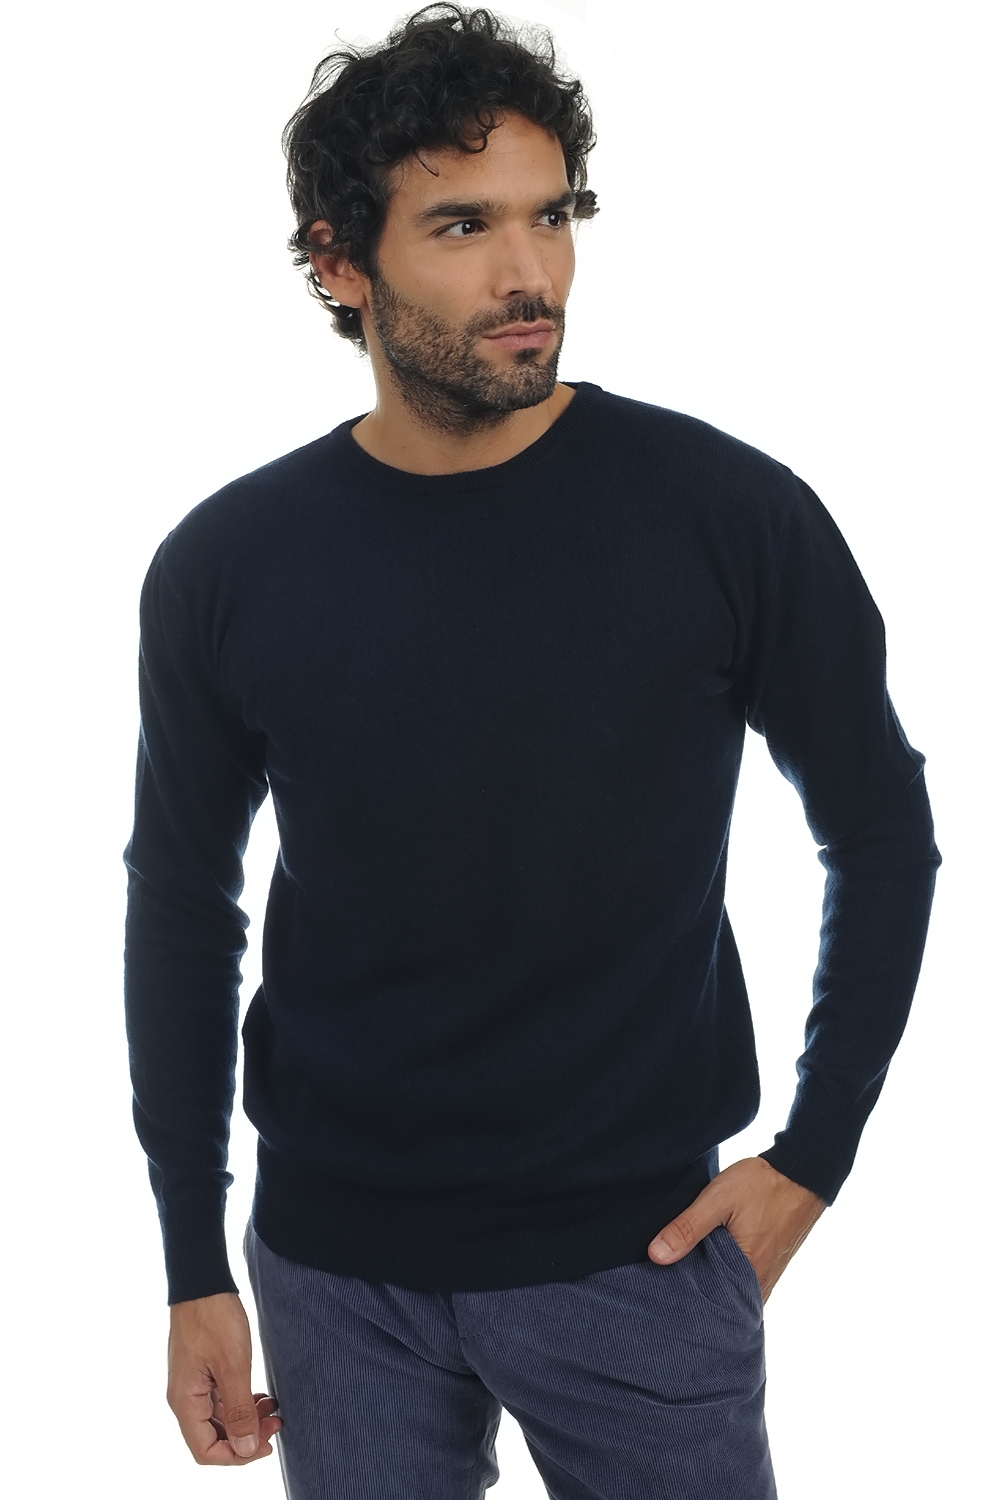 Cachemire pull homme col rond keaton marine fonce m